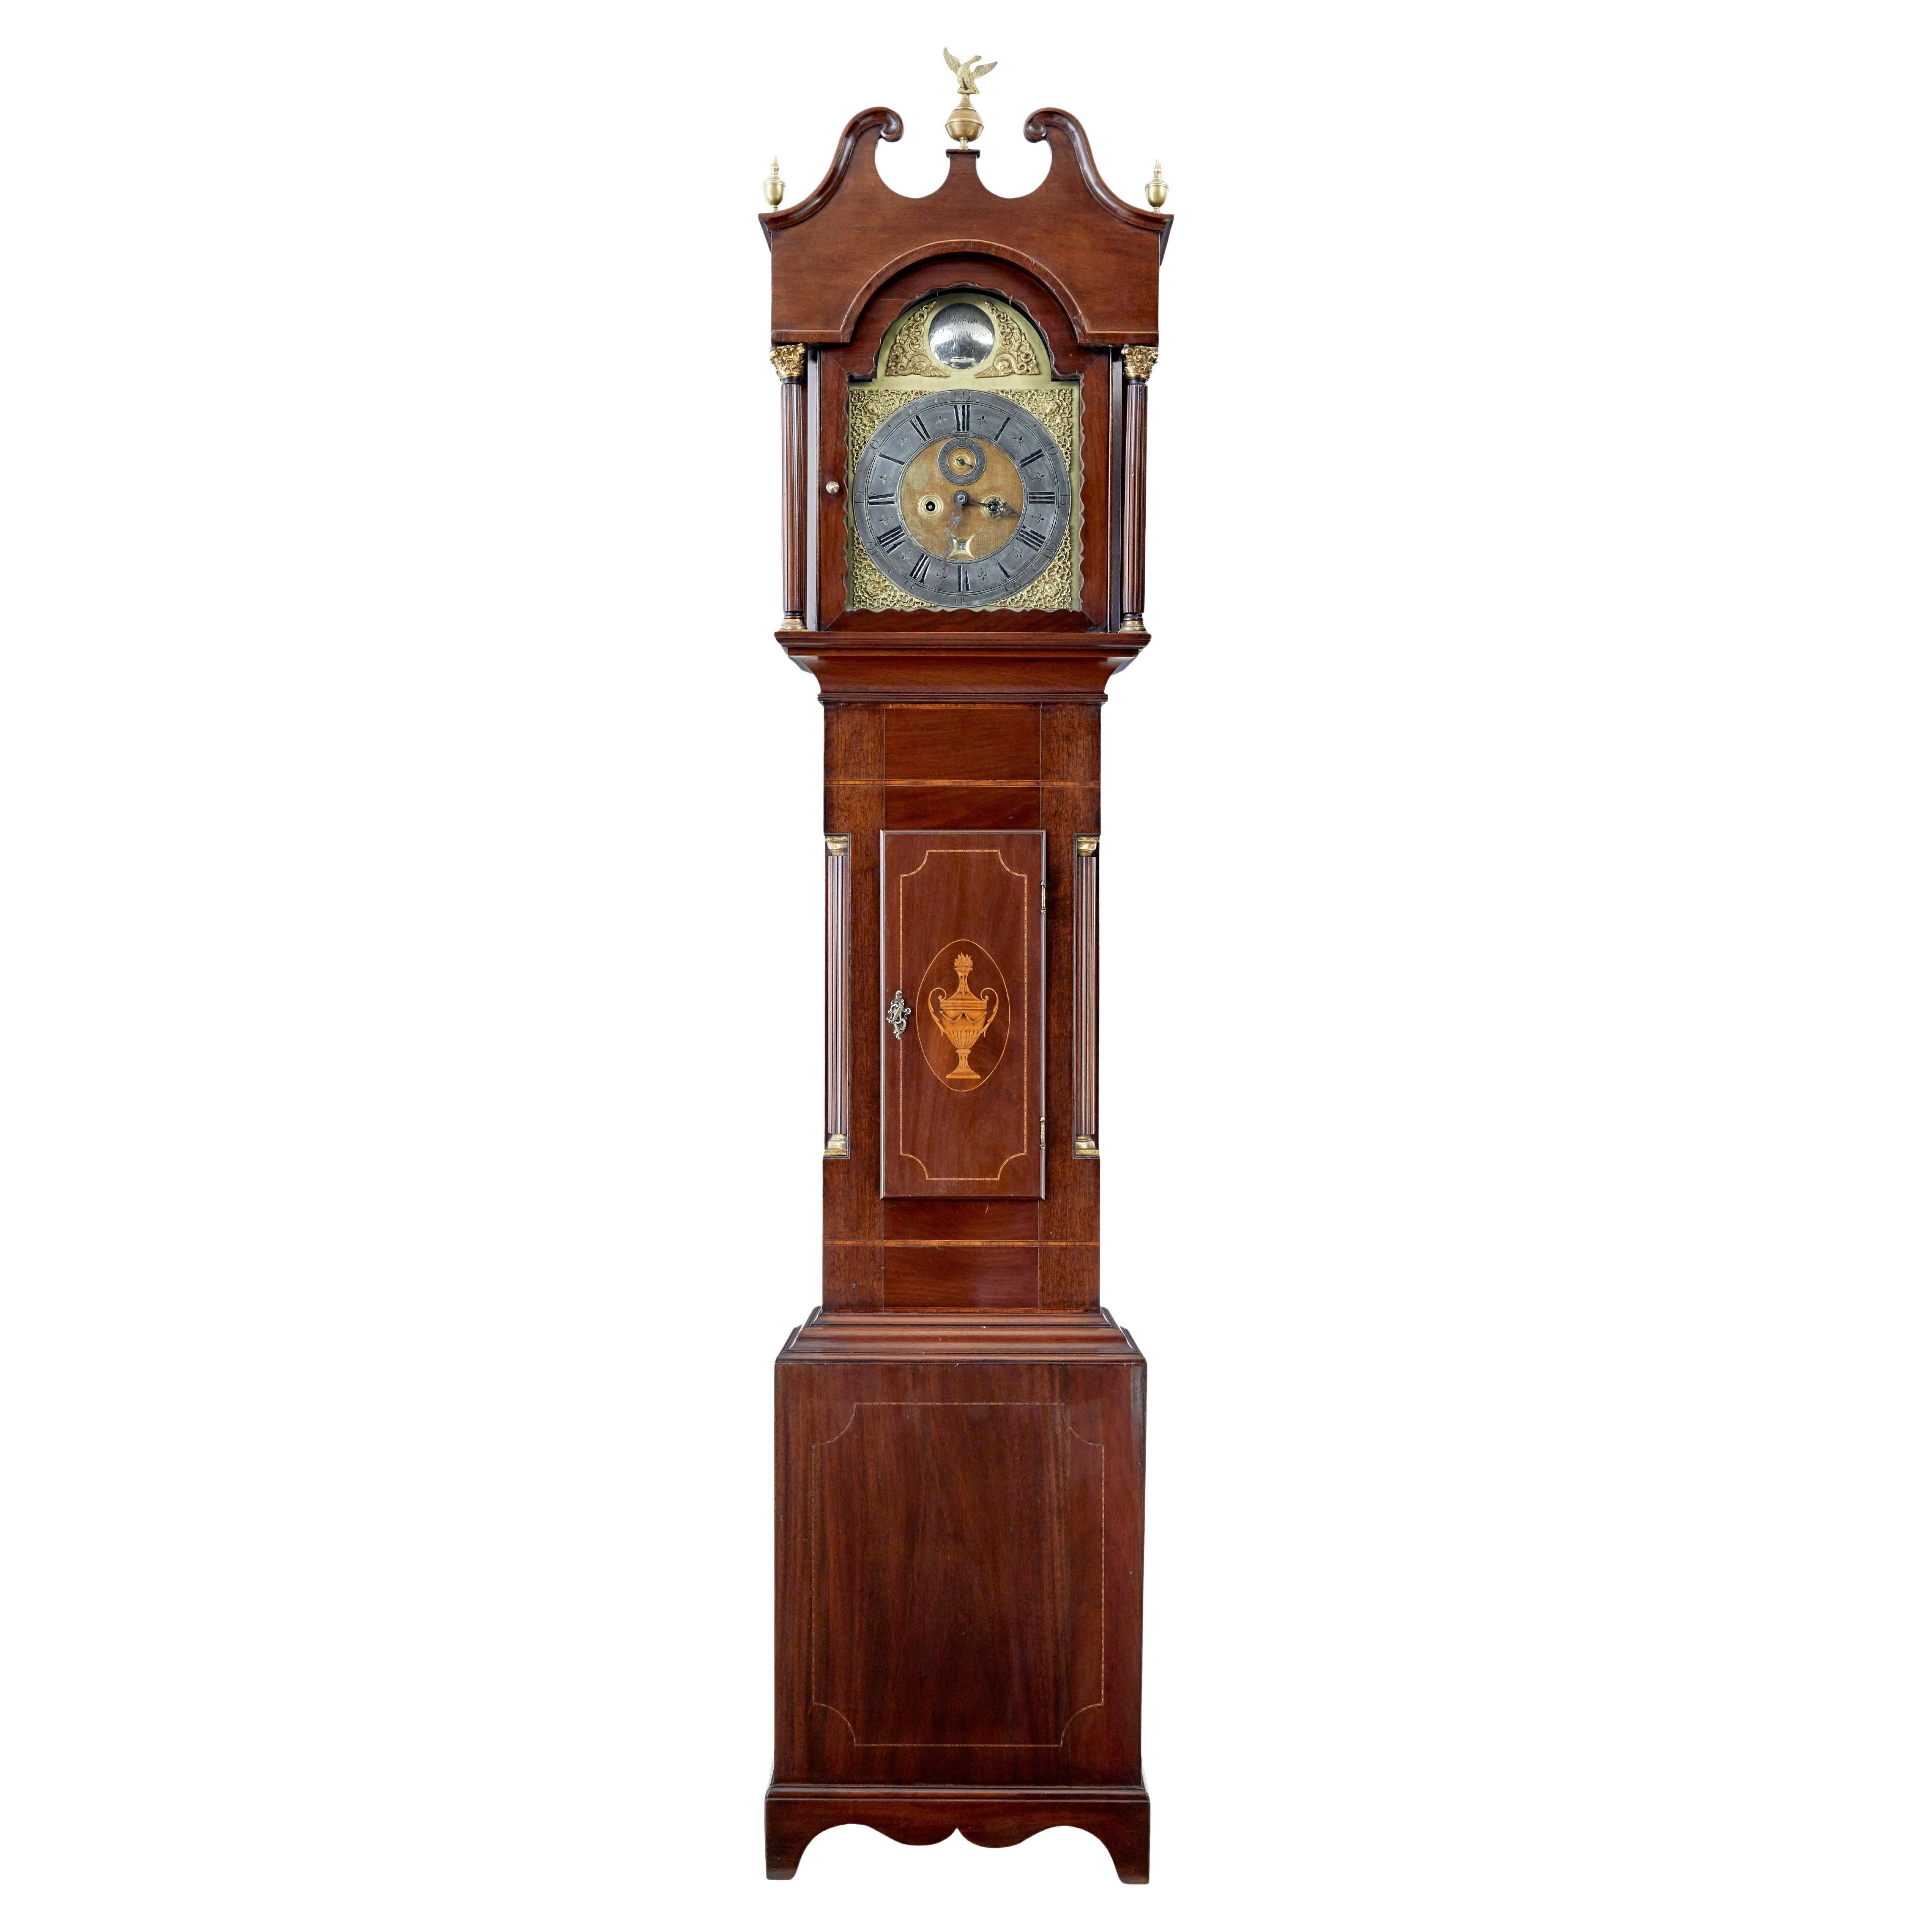 18th century inlaid mahogany long case clock by William Underwood For Sale